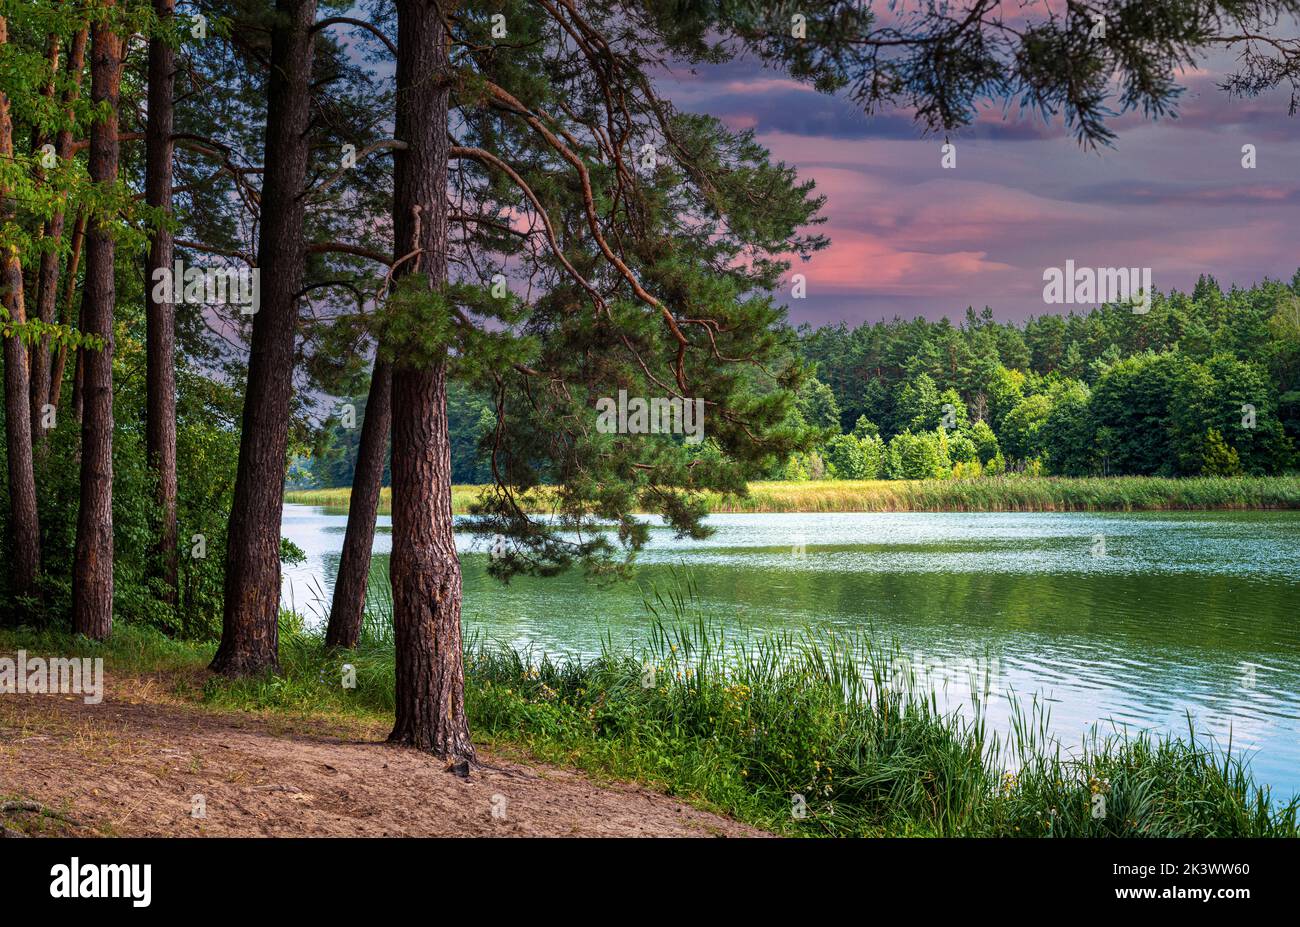 Beautiful natural scenery of river in forest. Landscape with twilight in coniferous woods and river. Wonderful scene of forest river in summer with pi Stock Photo